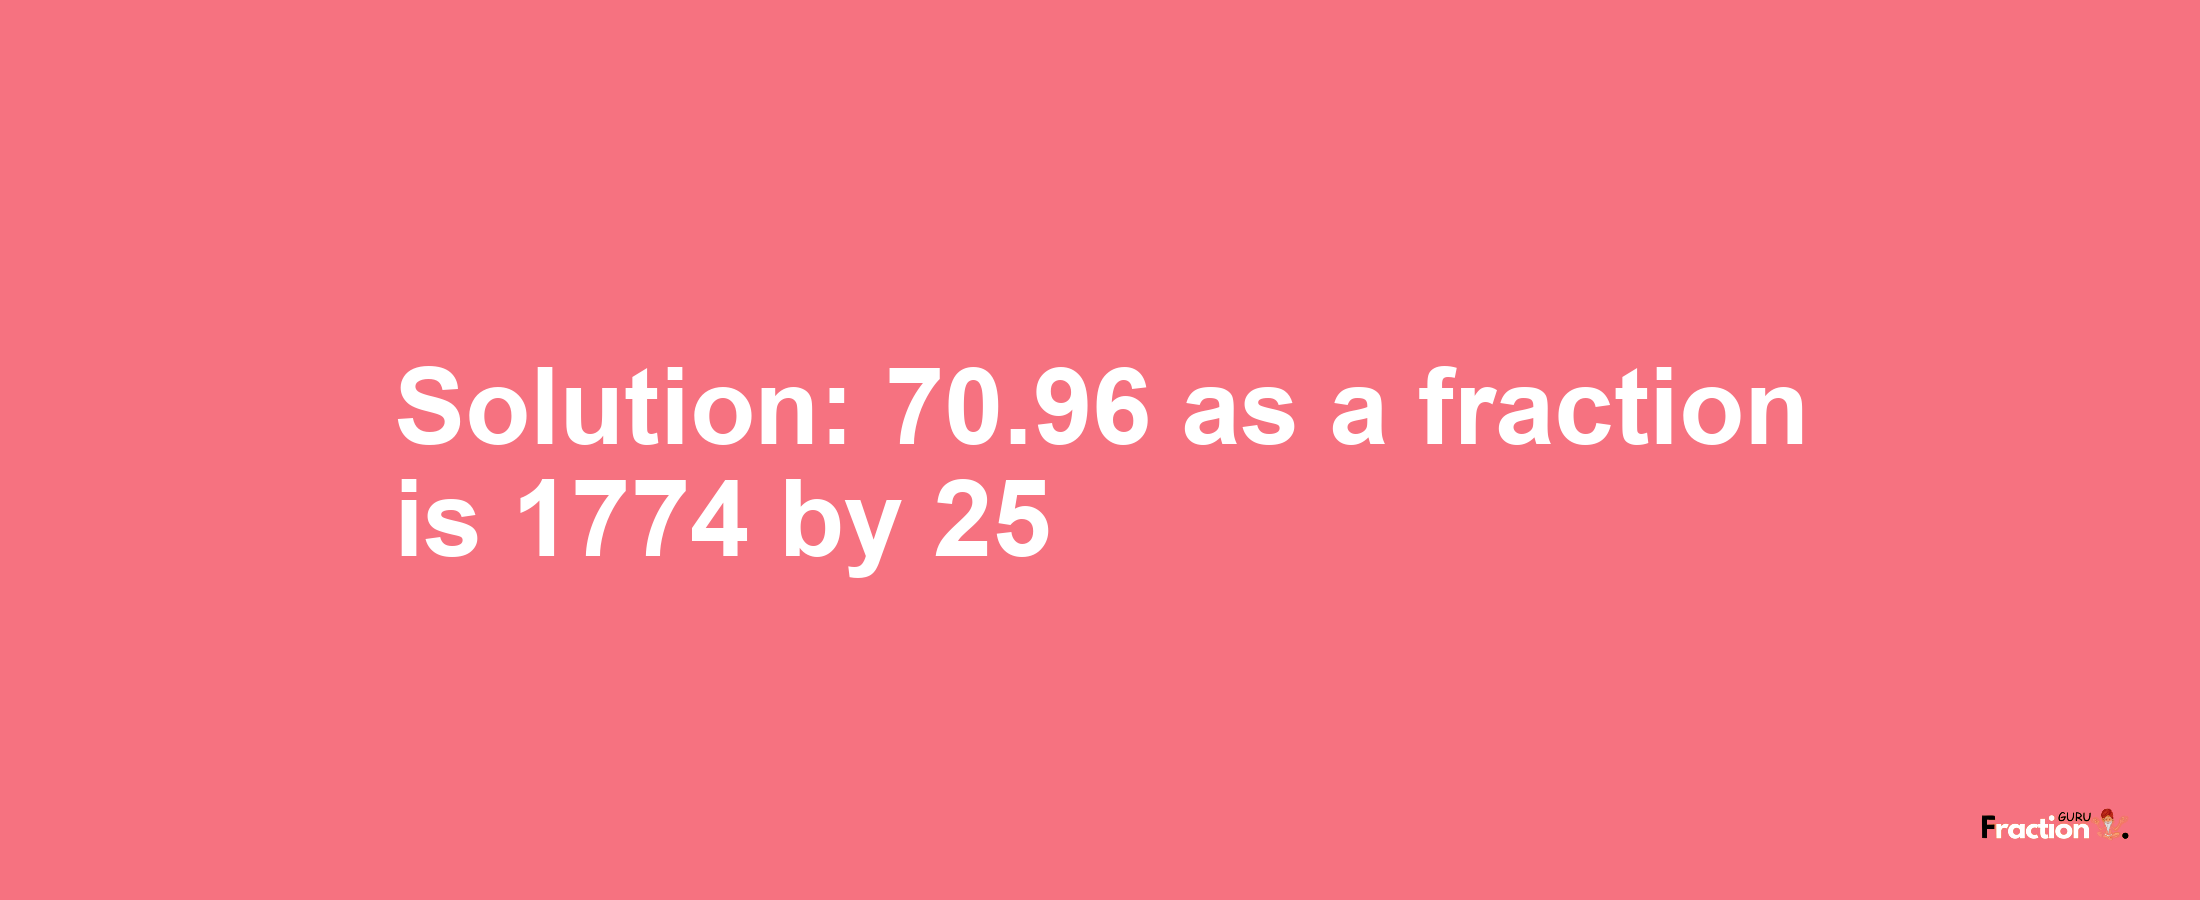 Solution:70.96 as a fraction is 1774/25